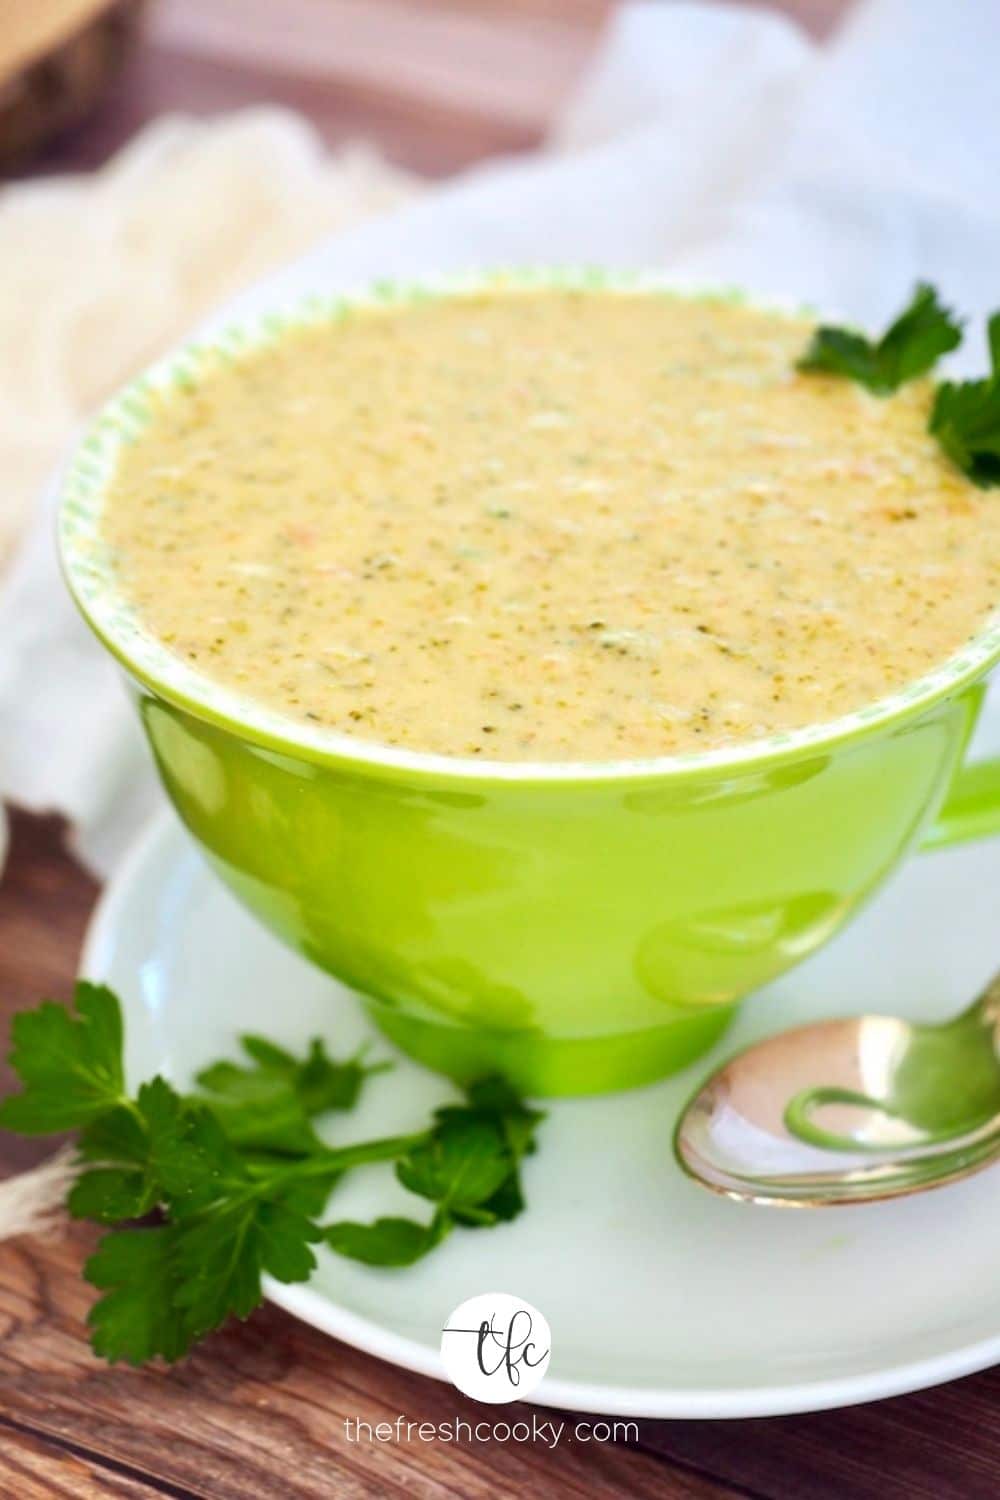 How To Make Better-than-Panera Broccoli Cheese Soup